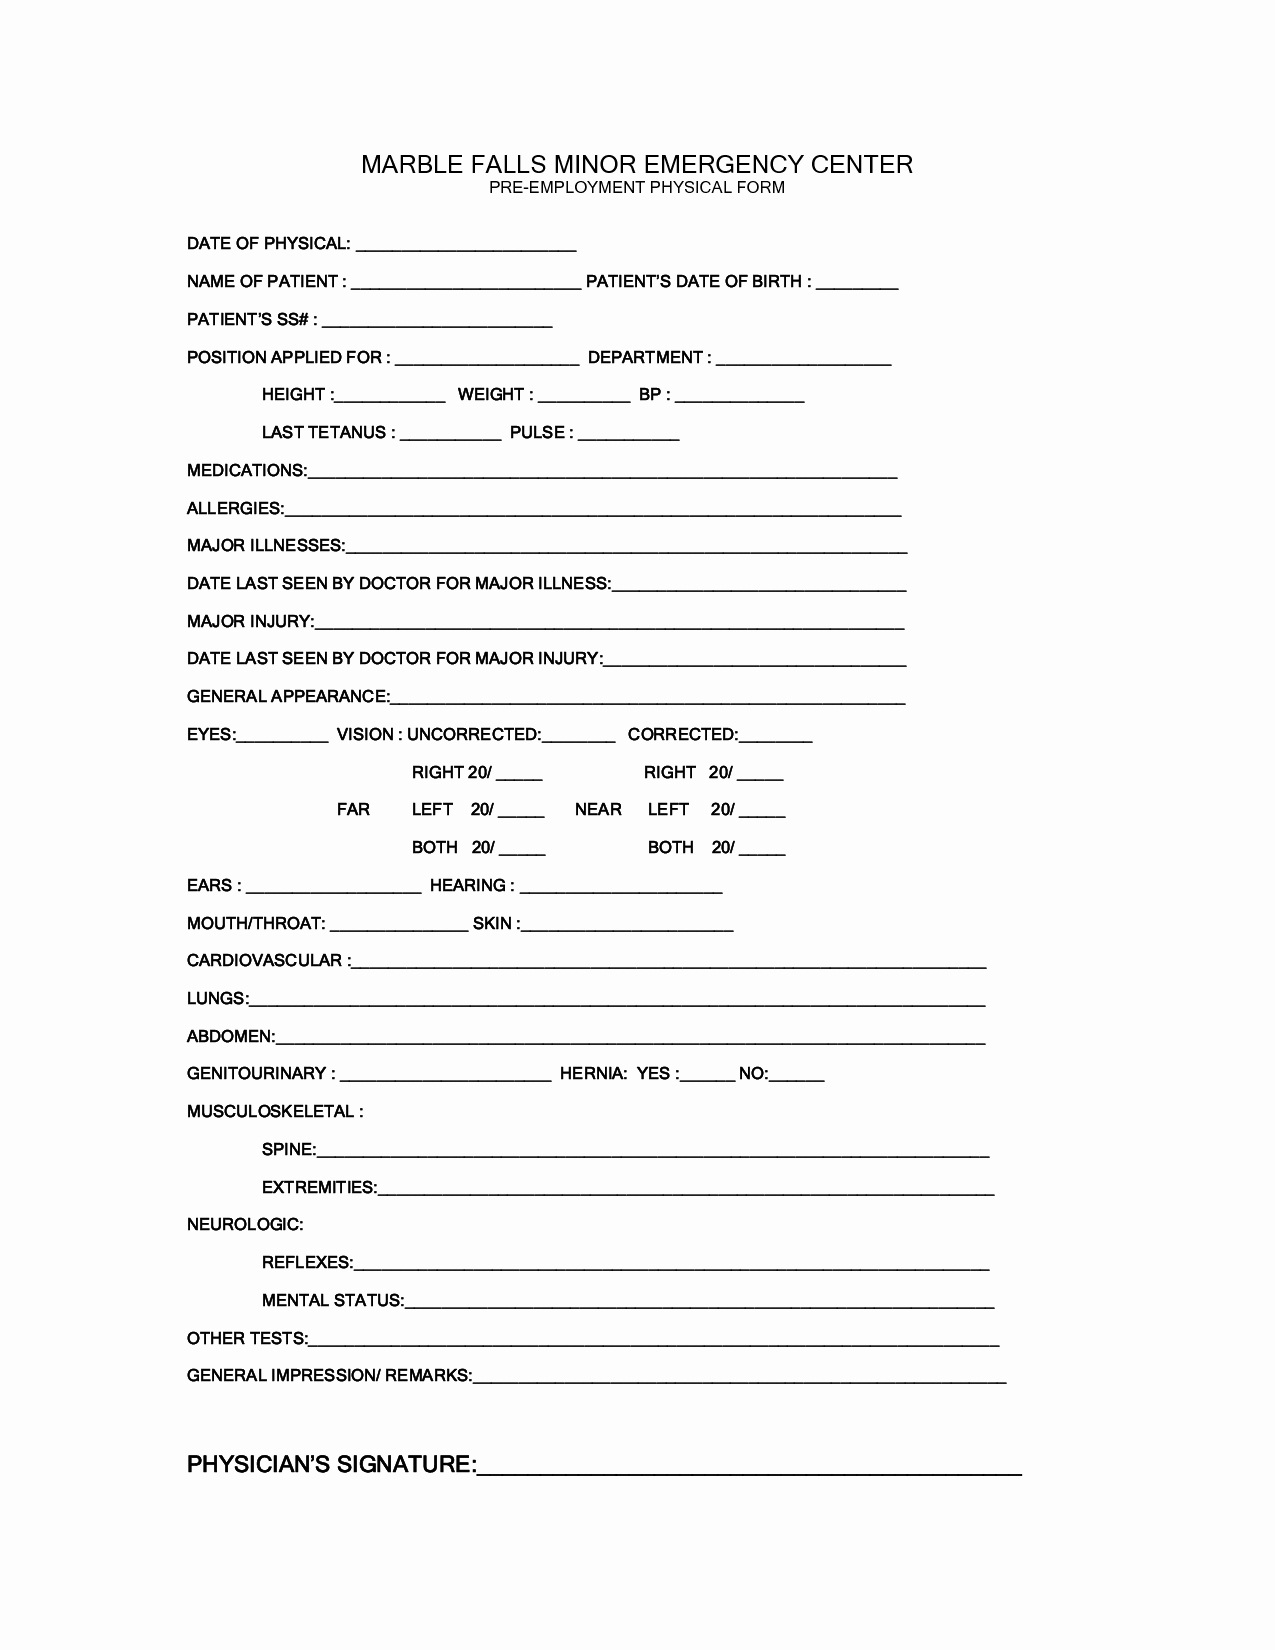 Pre Employment Physical form Template New Work Physical Exam Blank form Bing Images